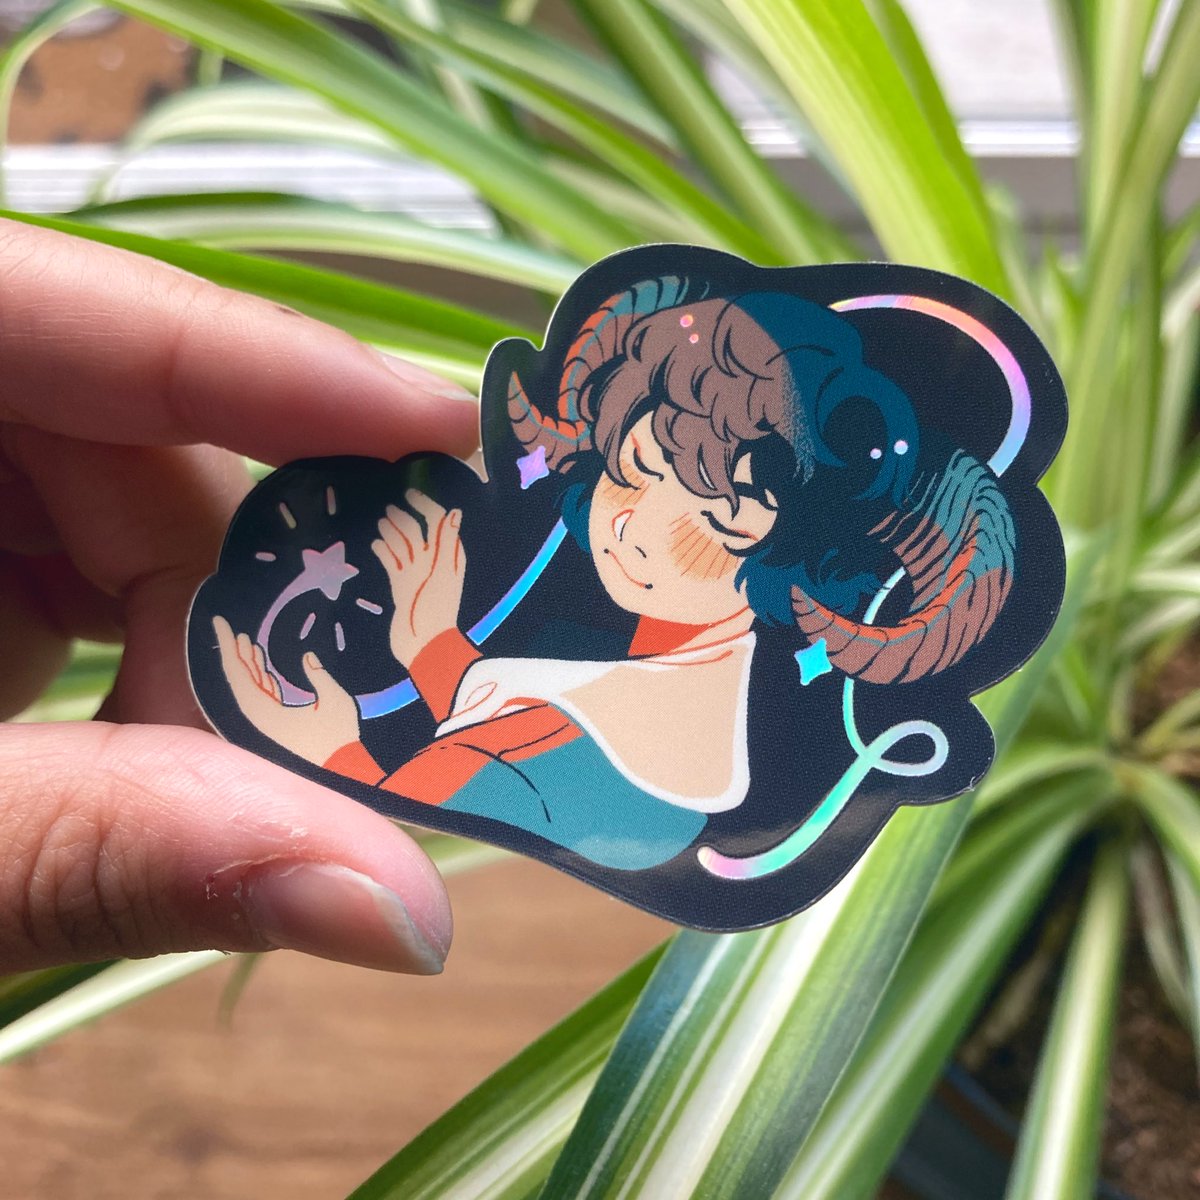 「New holographic sticker for ECCC!  」|Chan Chau @ TCAF 2104のイラスト